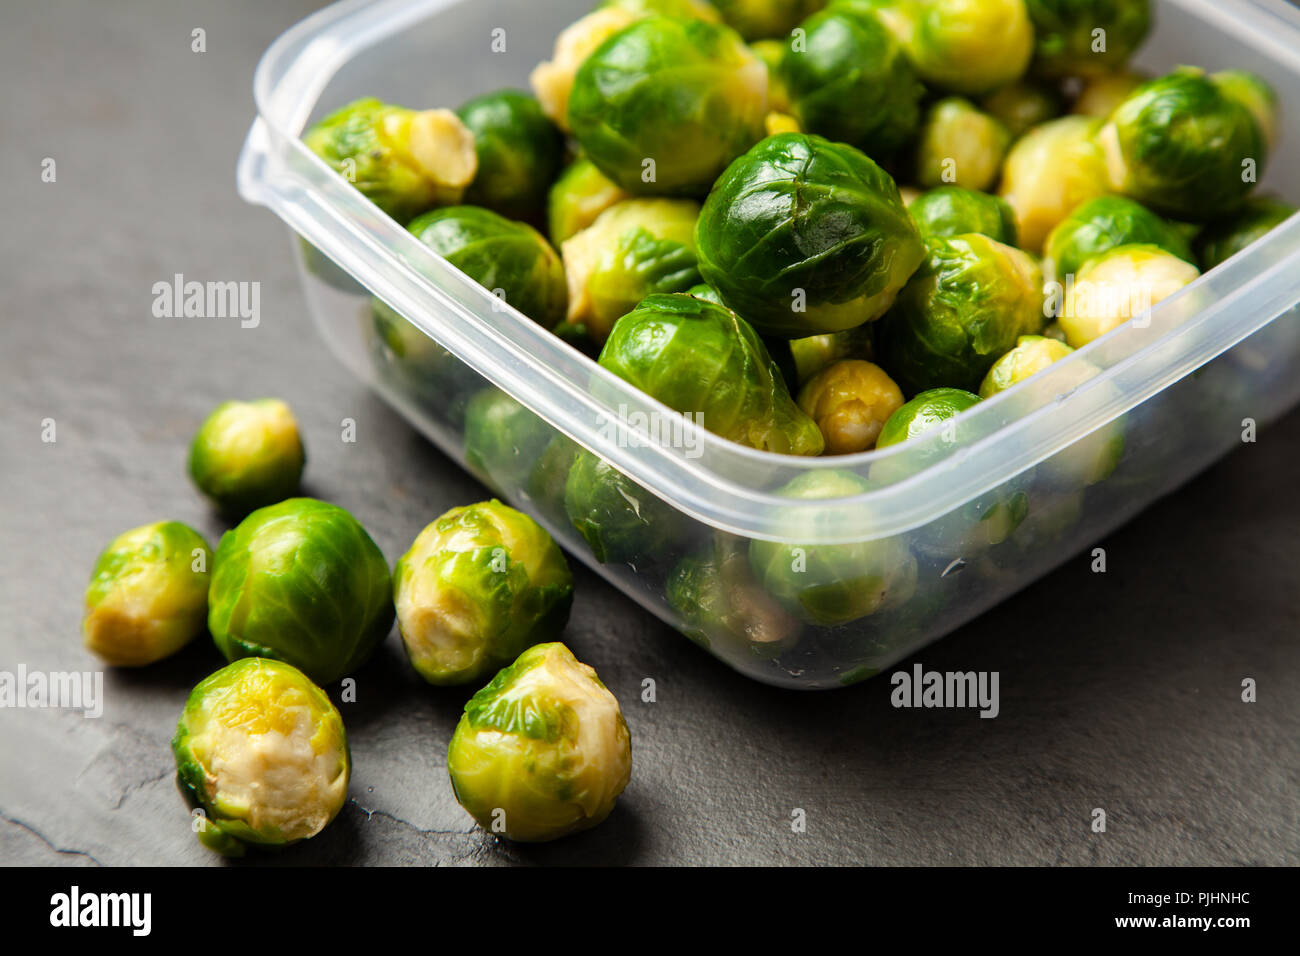 Brussles sprouts in a plastic container Stock Photo